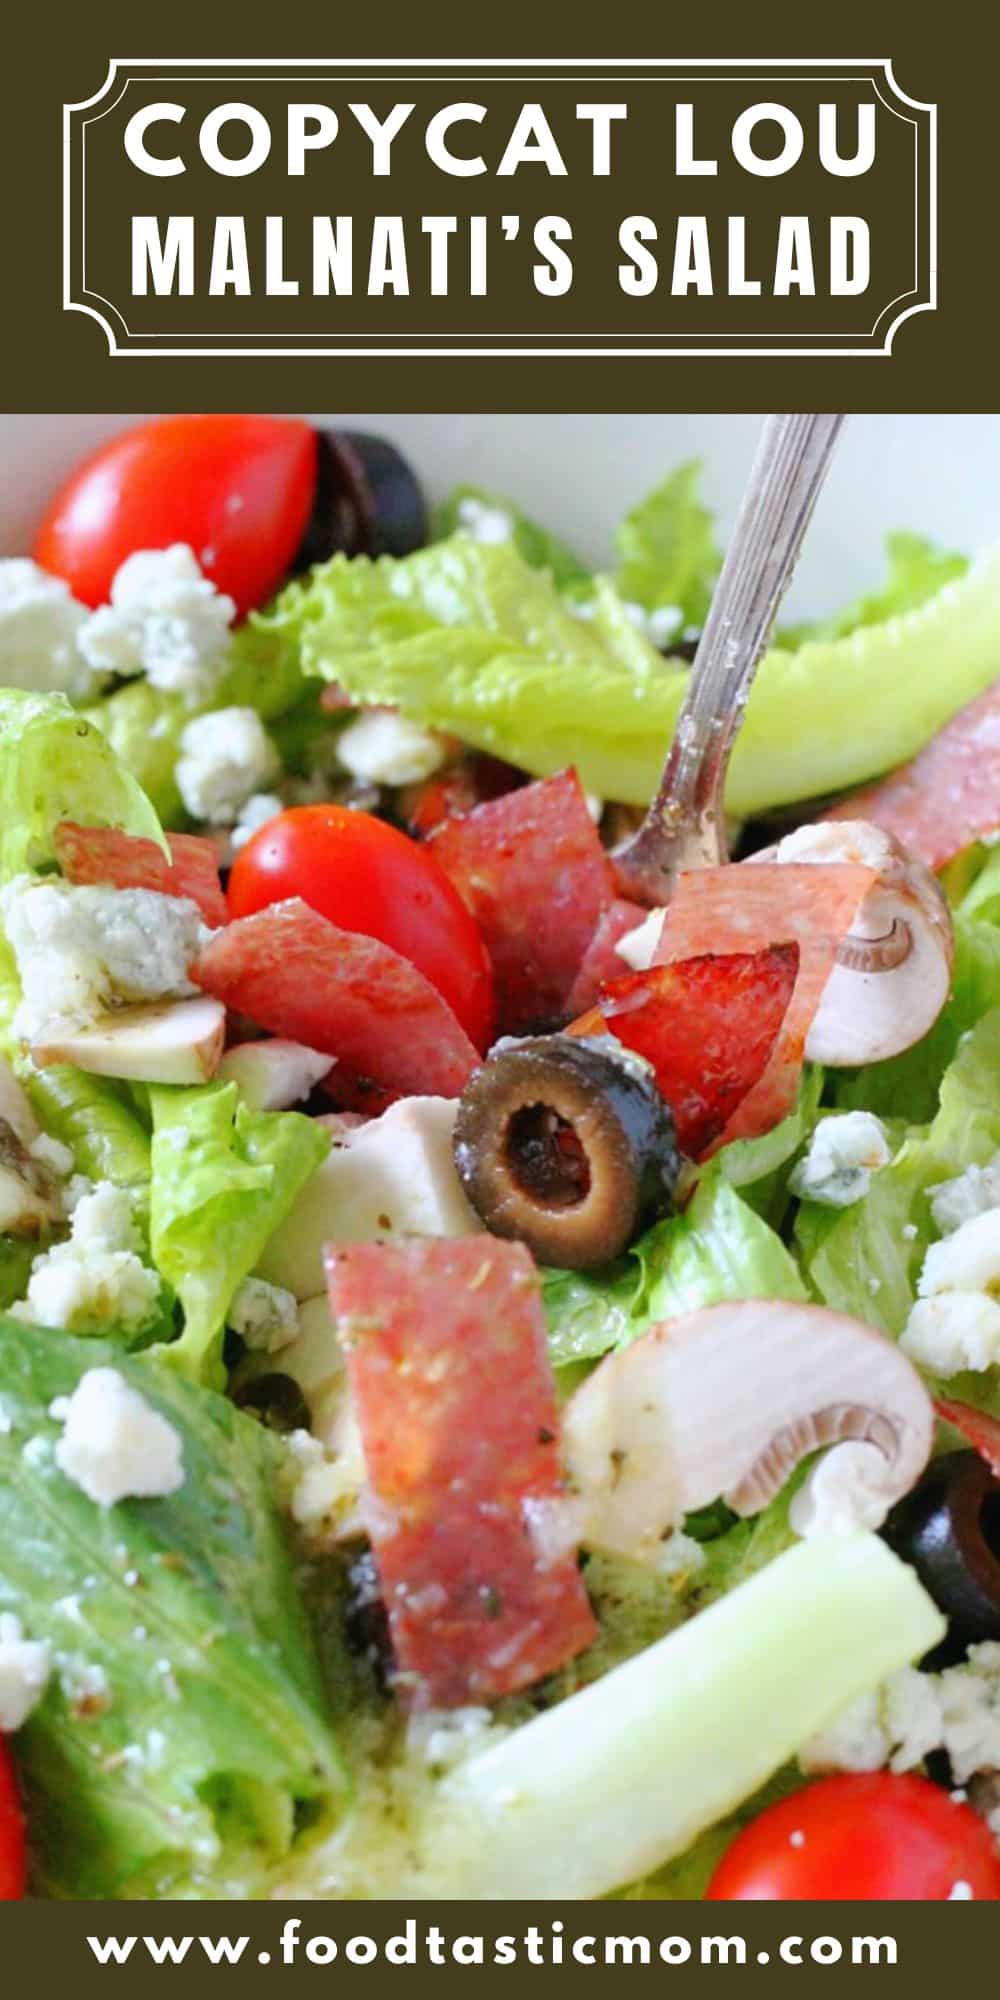 This copycat Lou Malnati's salad will help take you on a virtual trip to Chicago. Sweet Italian dressing tops romaine, tomatoes, mushrooms and black olives - the crispy salami helps to really make this a stand-out salad. via @foodtasticmom